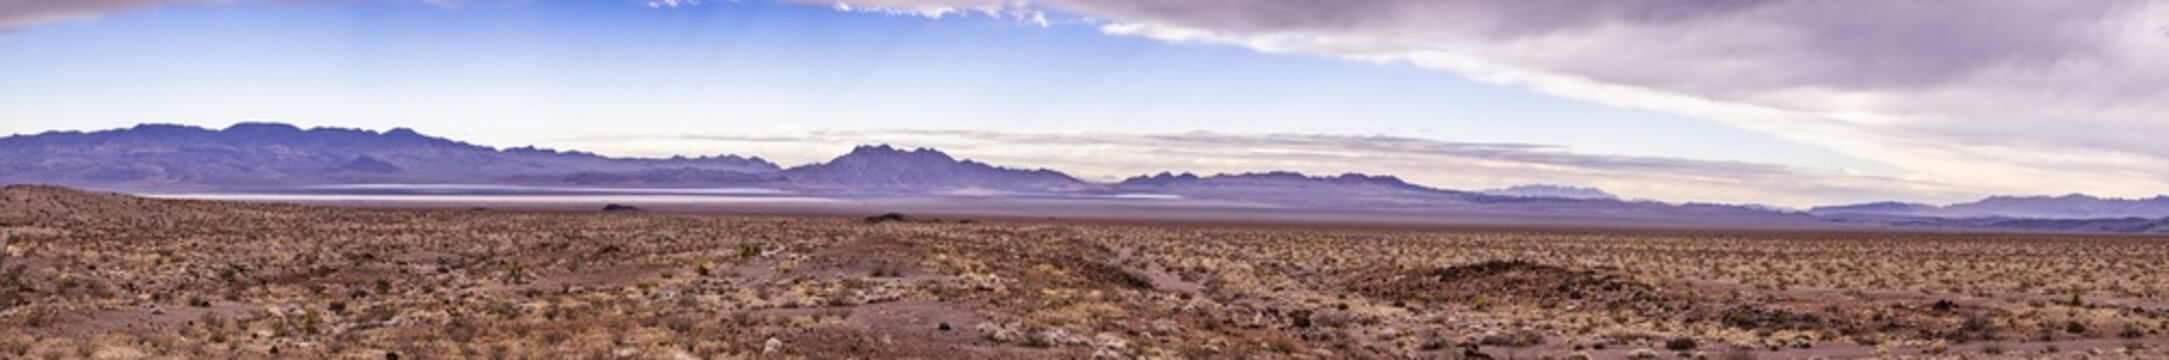 Panoramic image over Southern California desert during daytime